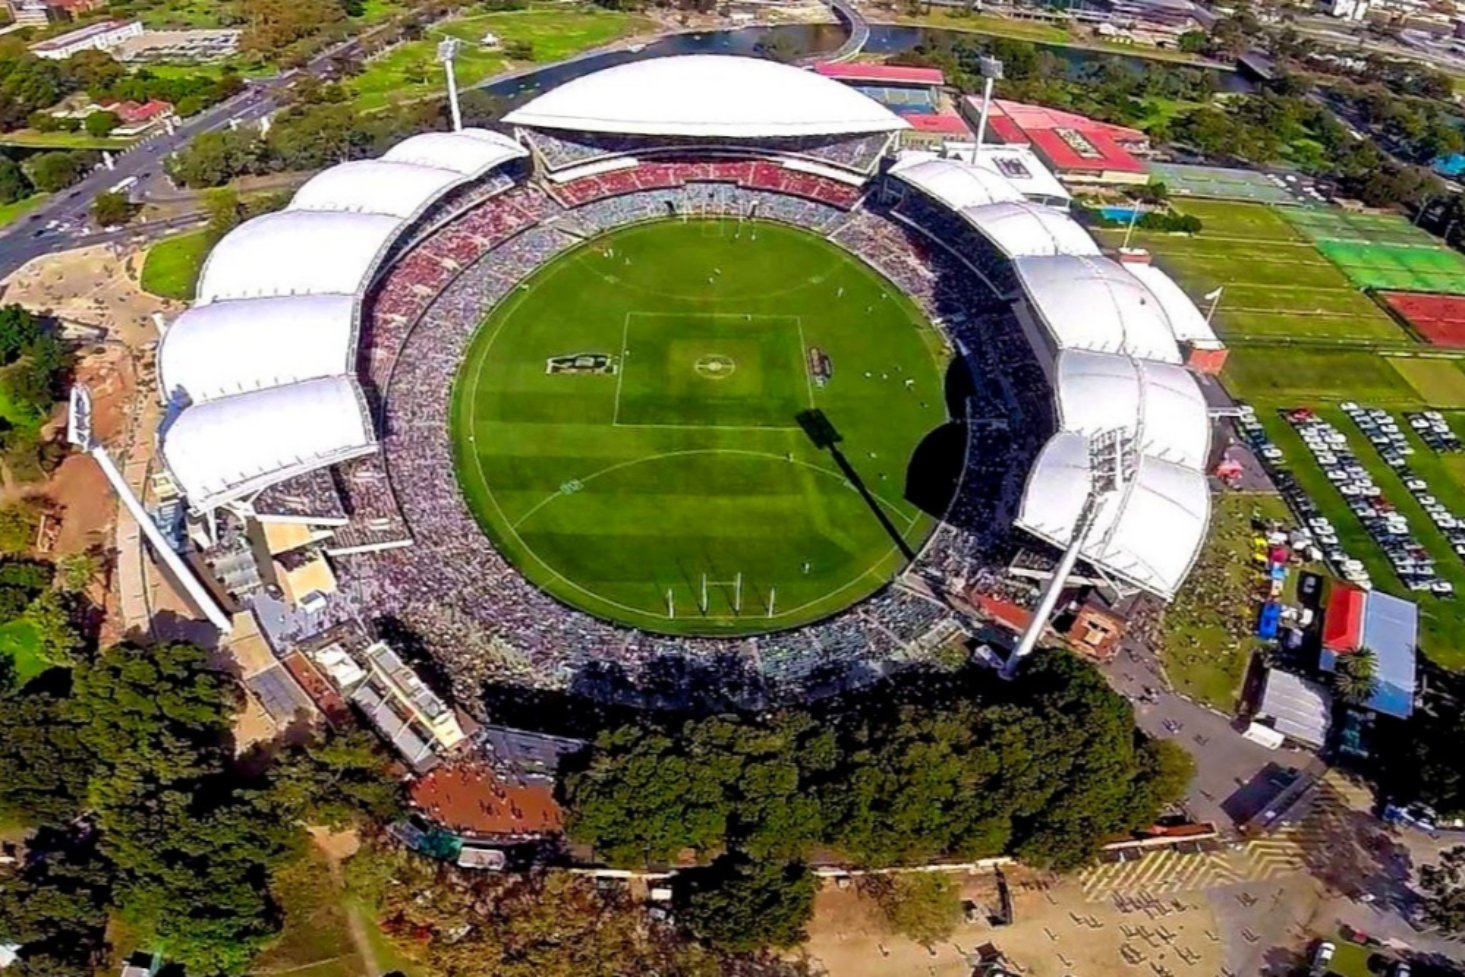 The Legacy of Adelaide Oval in Australian Cricket